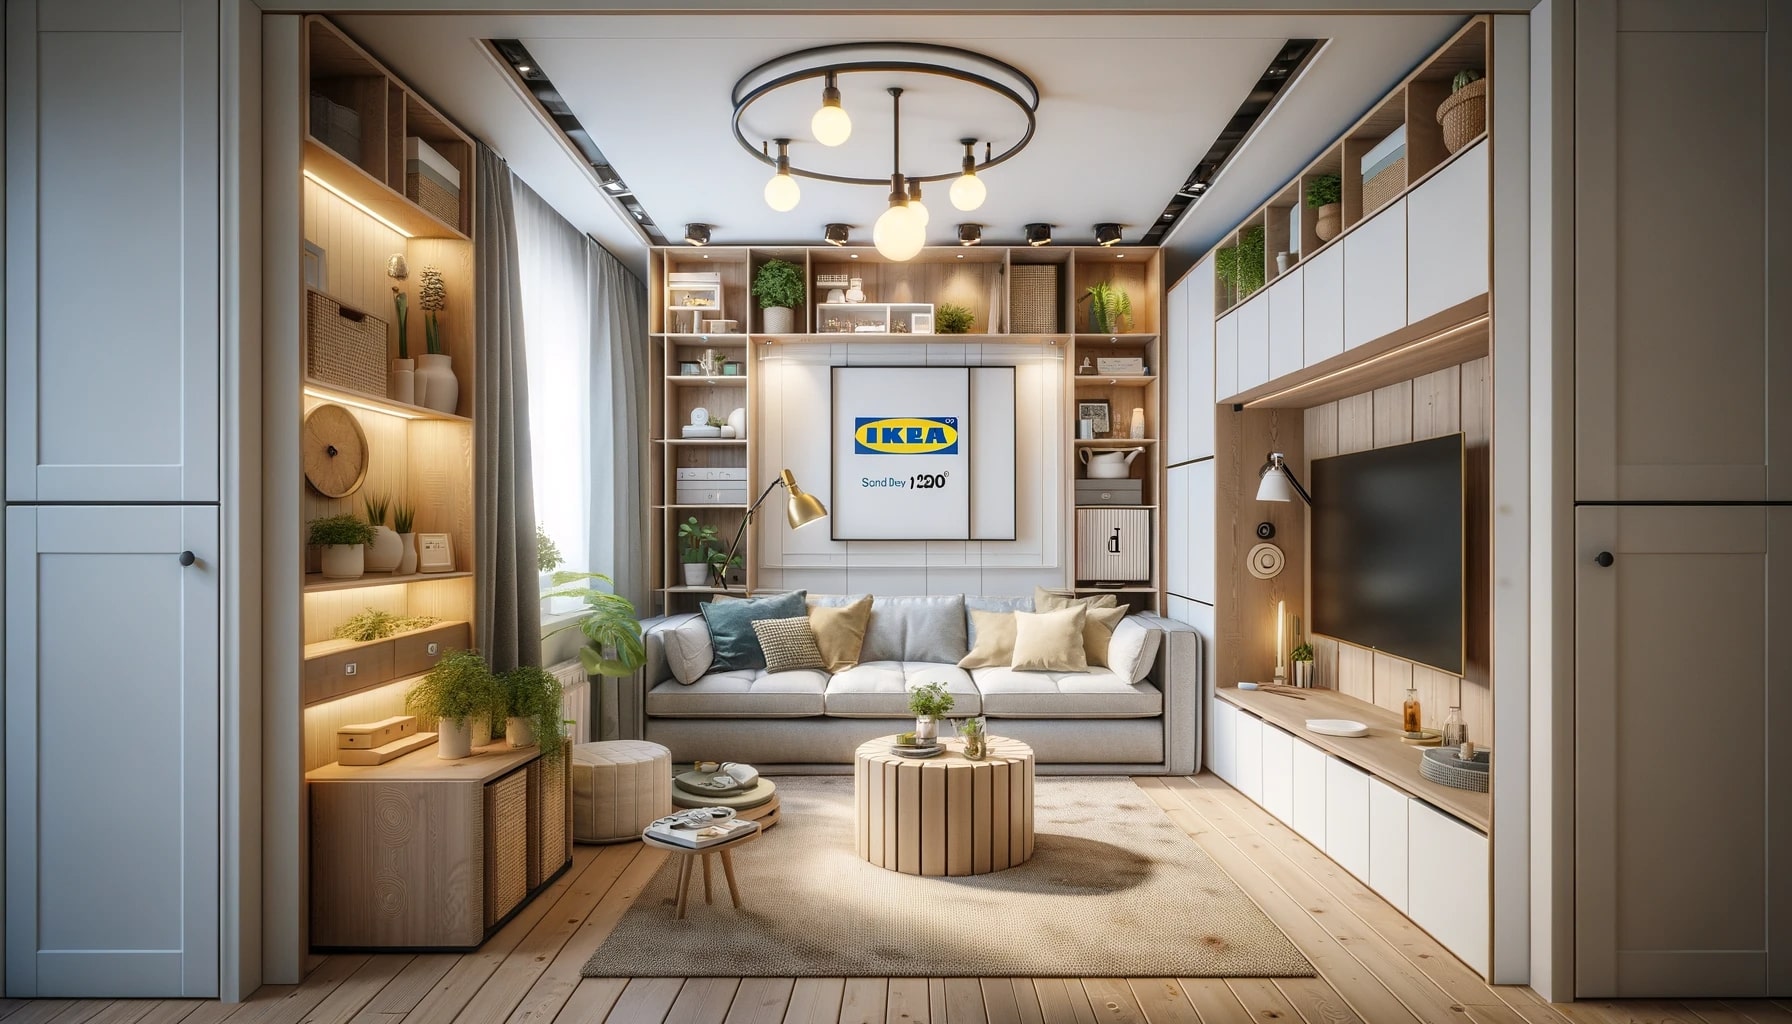 A living room with Maximizing solution of shelves and a television, perfect for Small Spaces.